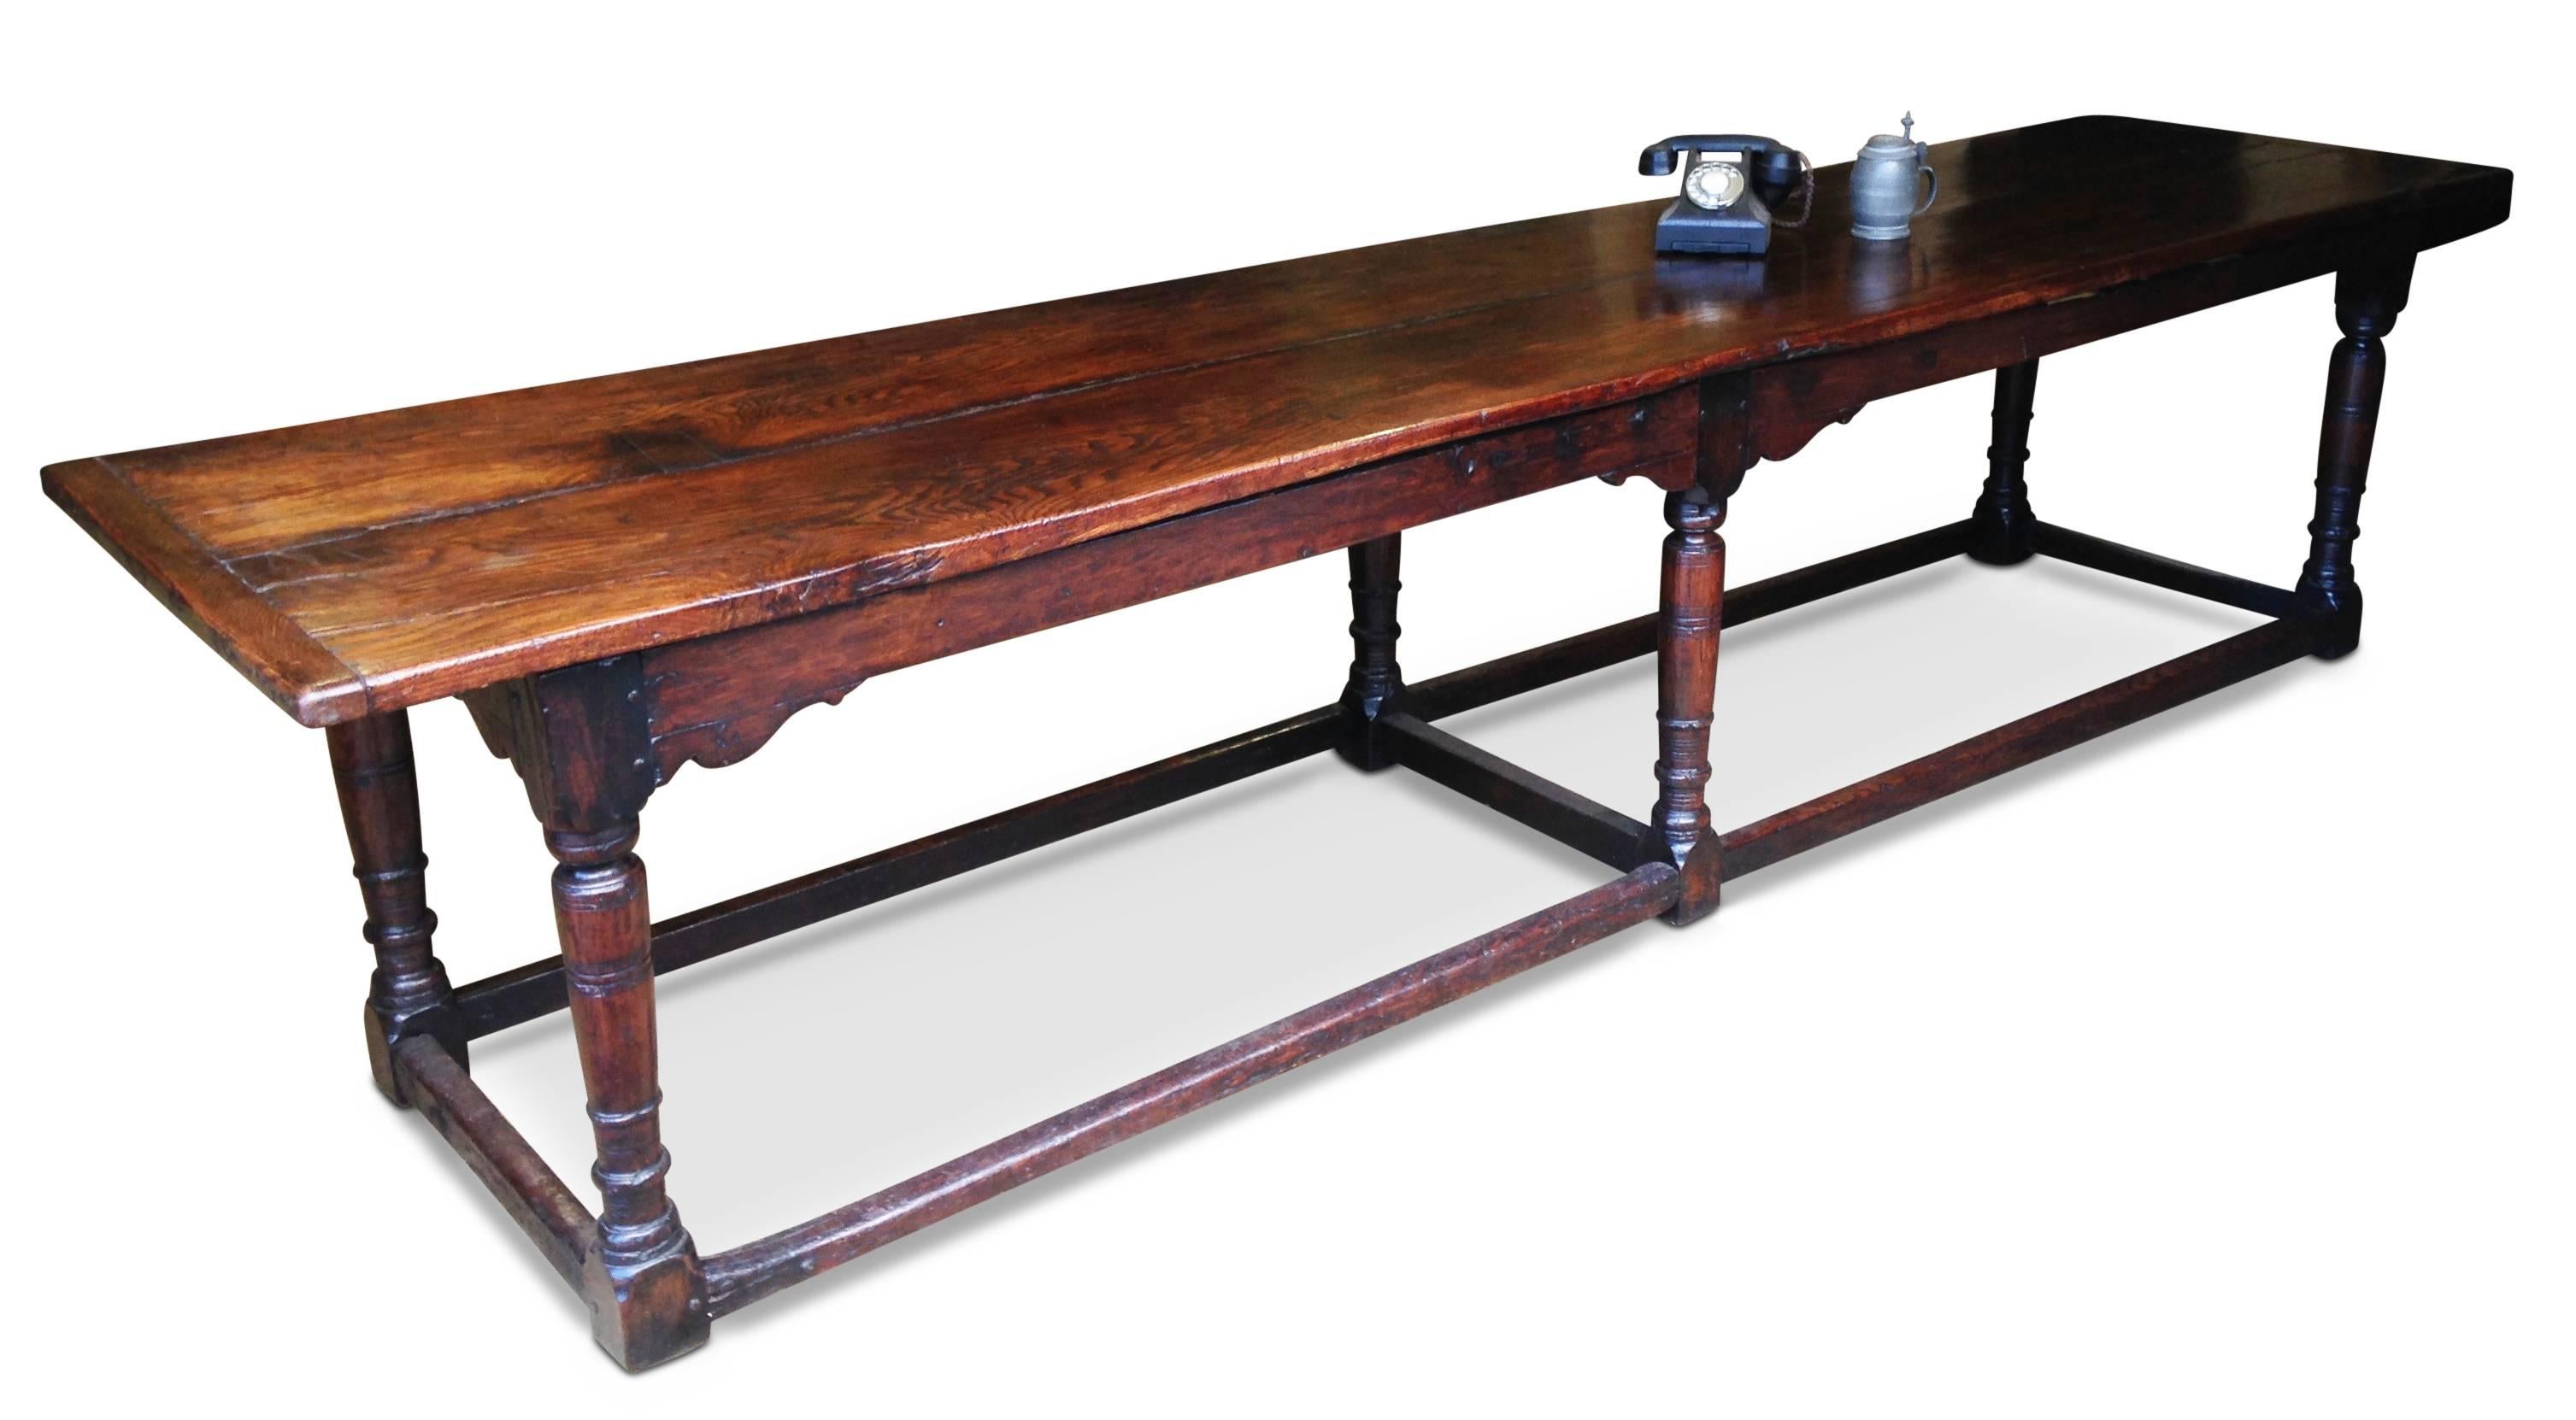 A very large 17th century oak refectory table.

The removable two-plank top sits upon six turned legs with spandrels, joined at the foot by stretchers. The underside of the top has later support boards which are not visible when the table is in